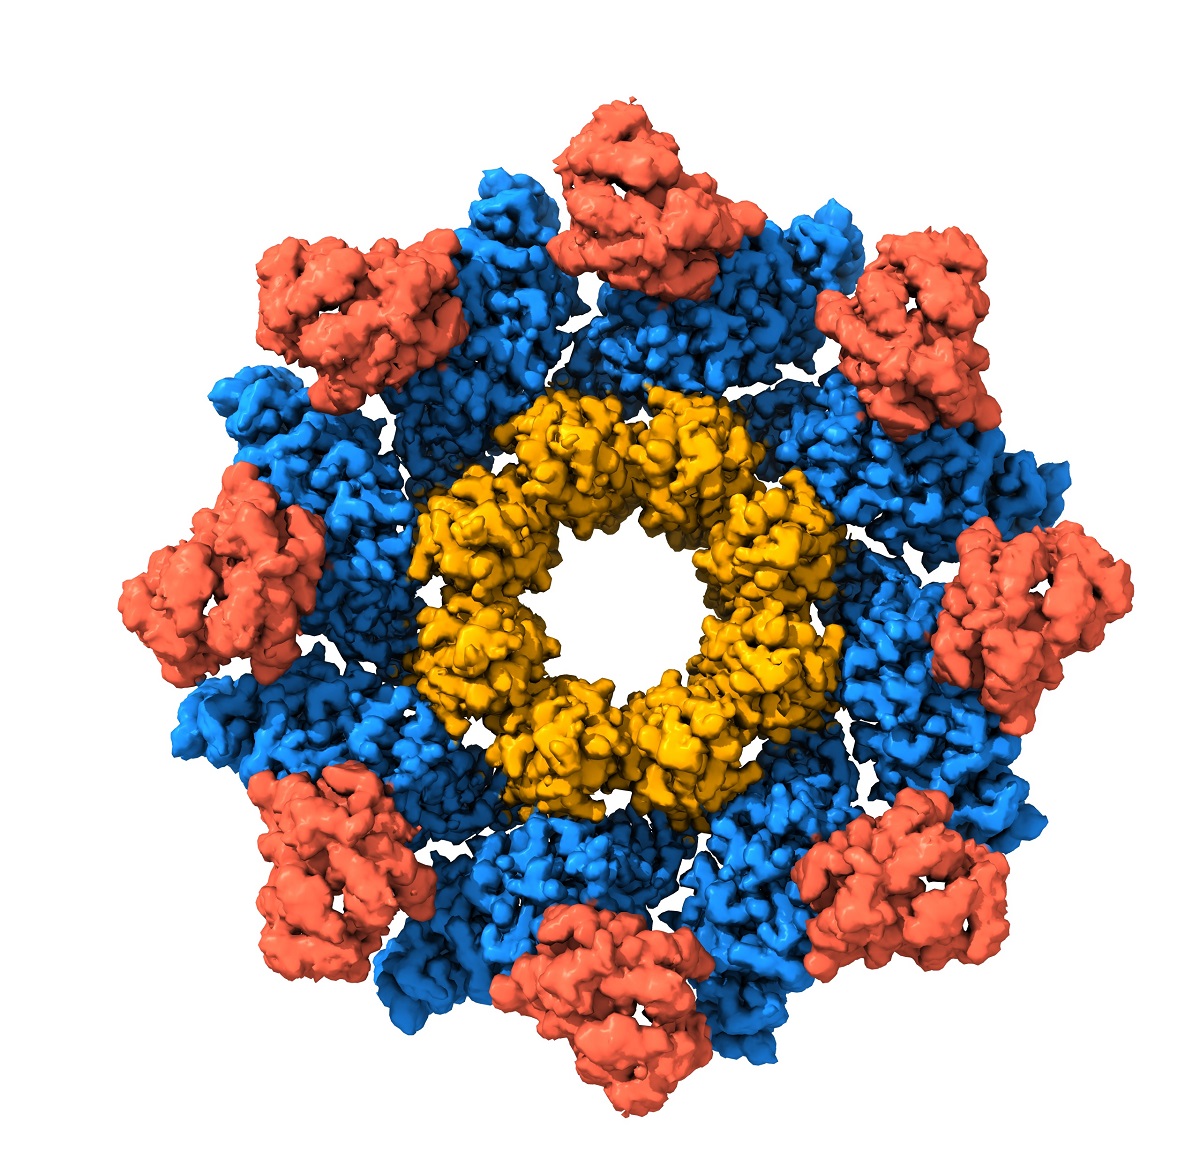 Three-dimensional structure of the SARM1 protein determined by cryo-electron microscopy. Credit: Jeff Nanson.